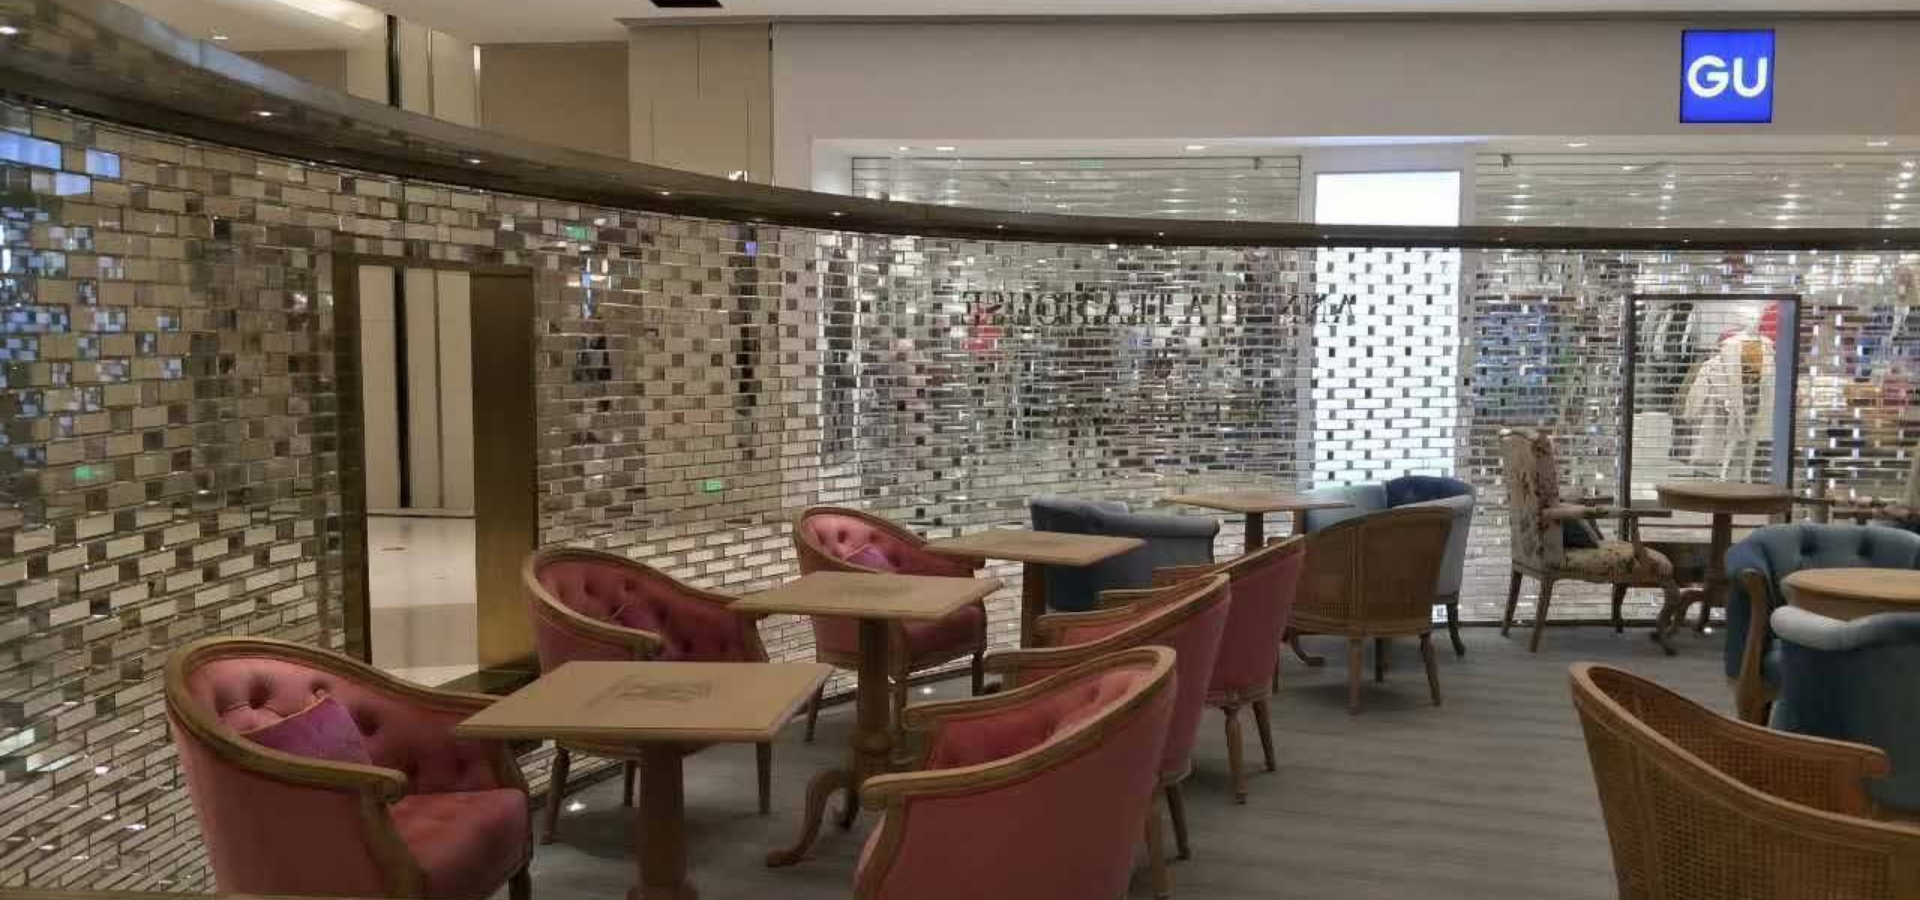 Transparent crystal glass bricks Wall in Shopping Mall